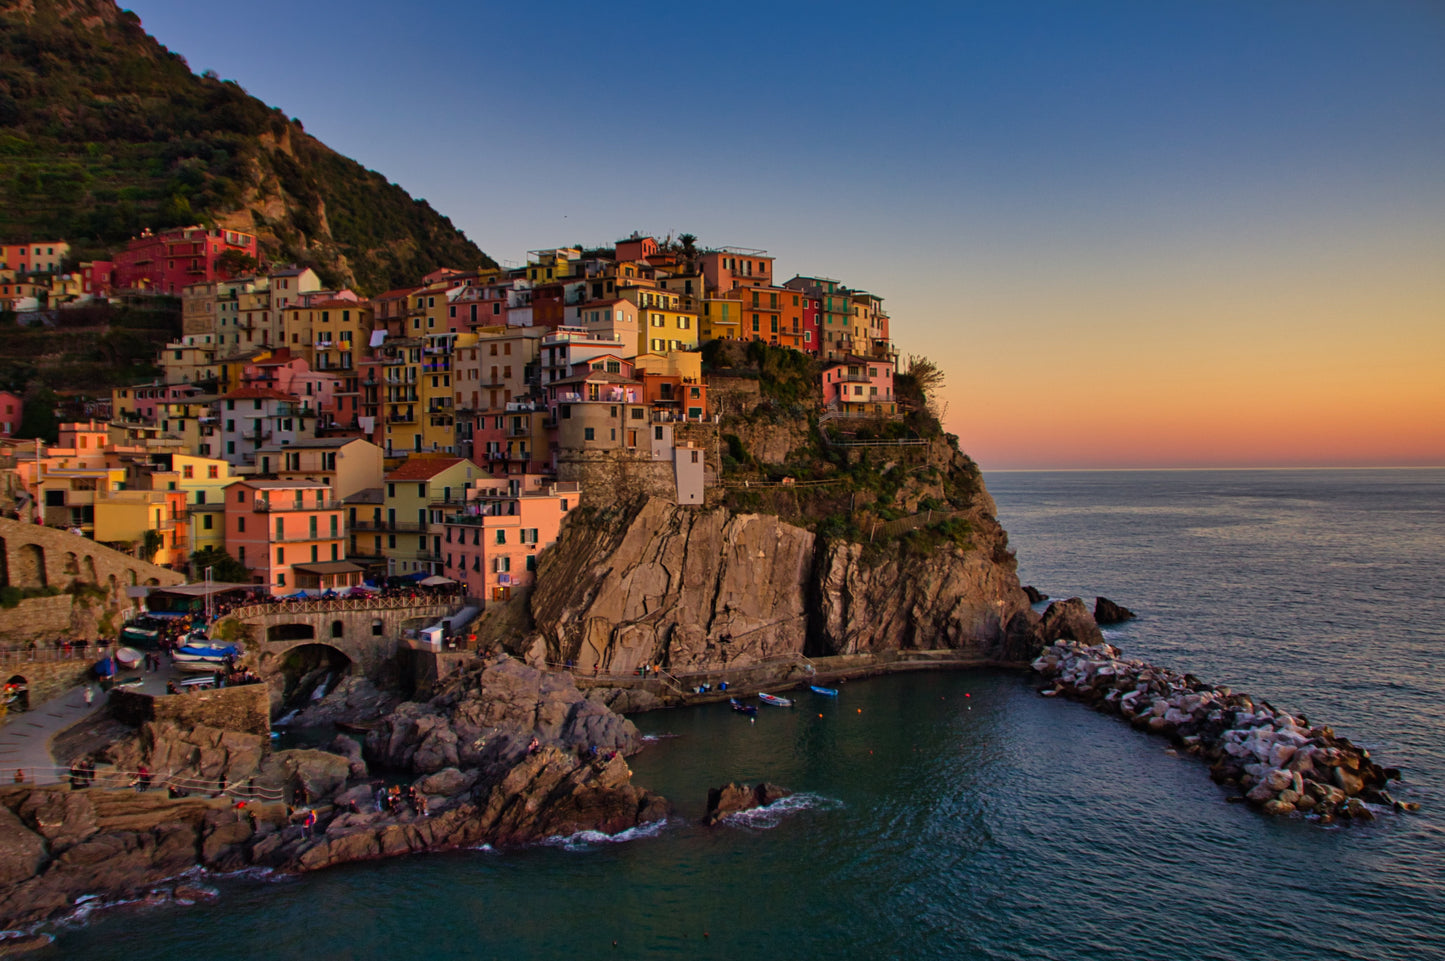 Full day experience at Cinque Terre